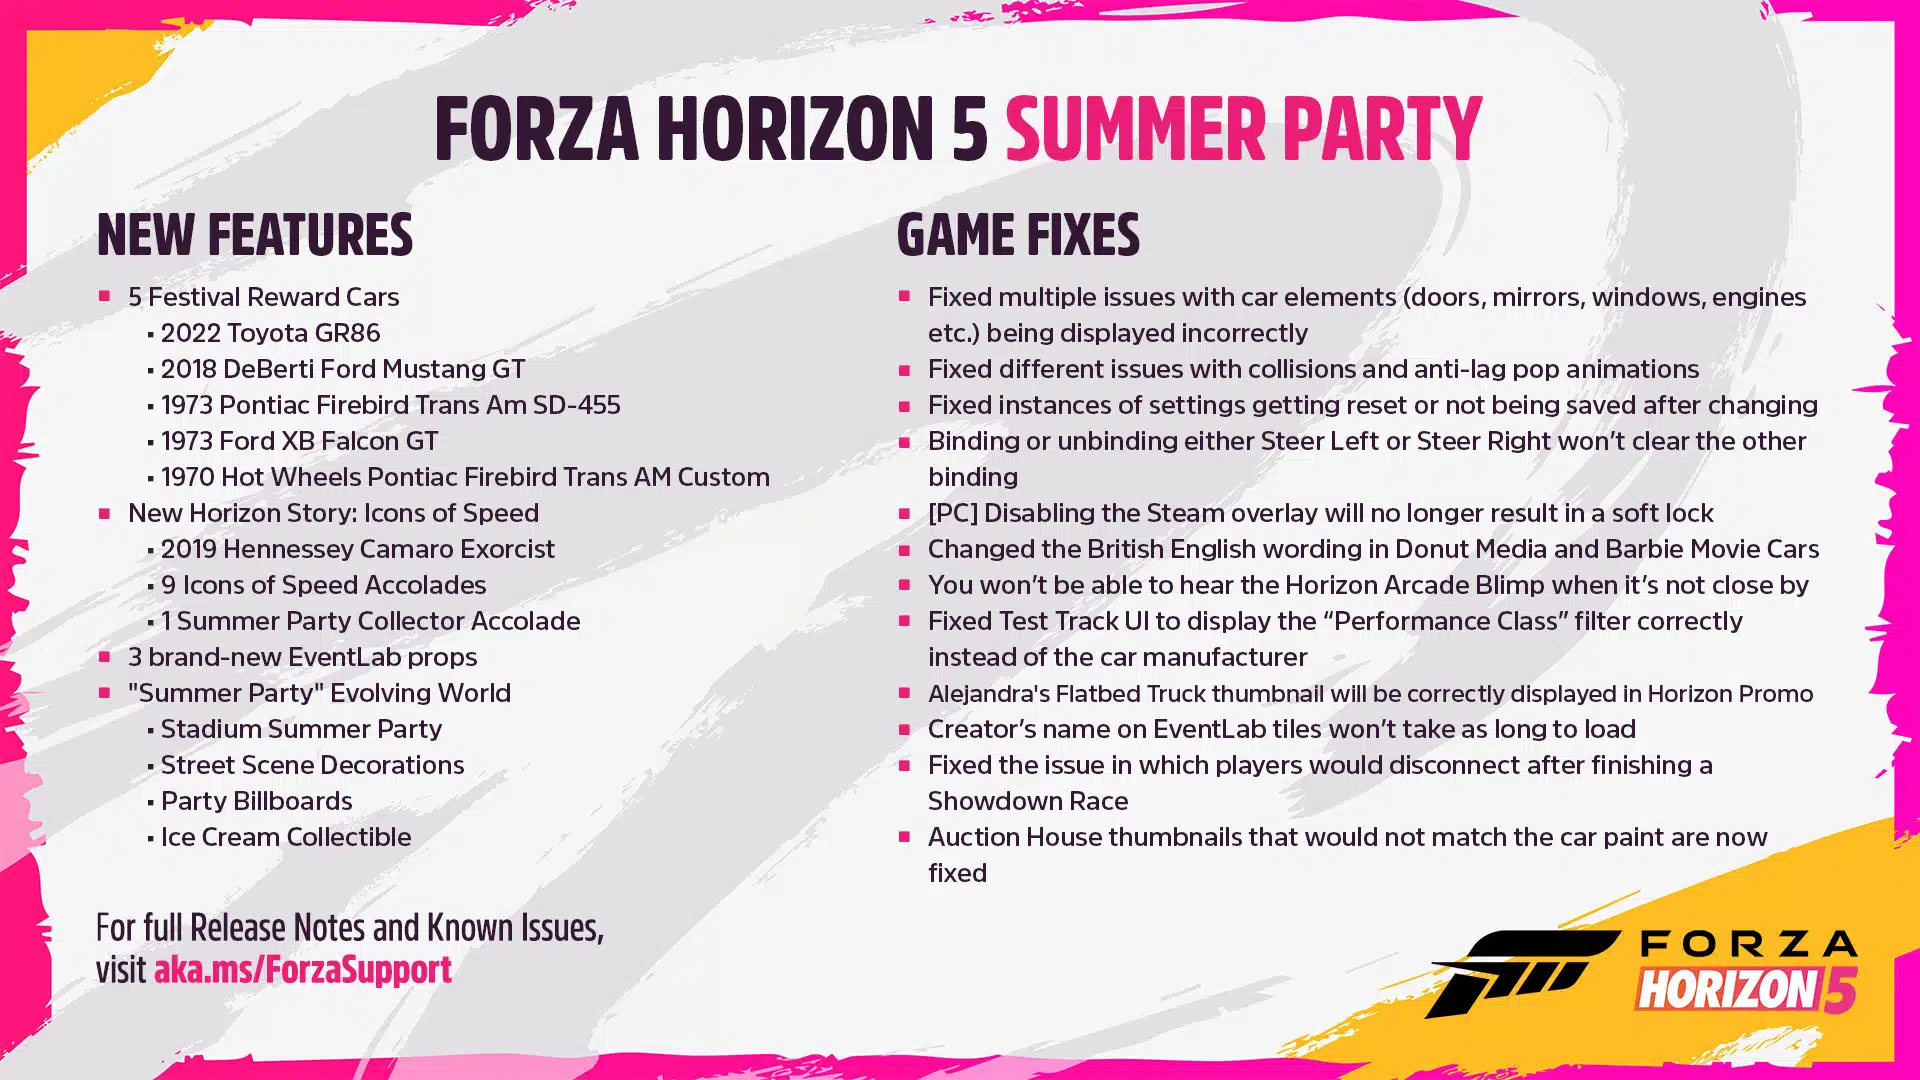 Forza Horizon 5 Update for July 18